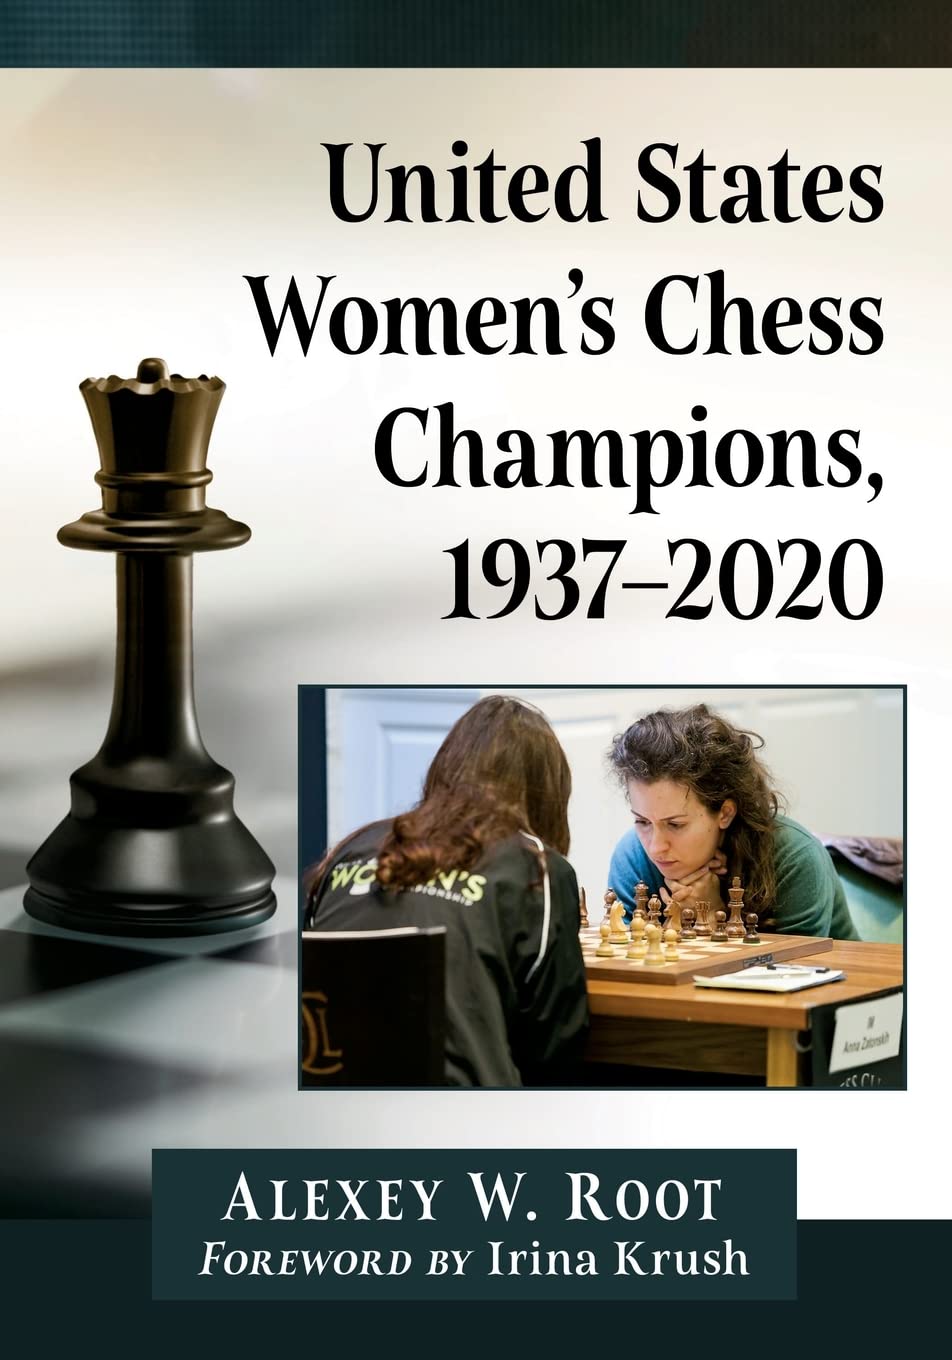 United States Women’s Chess Champions, 1937–2020, Alexey W Root, McFarland and Company, Inc. (10 Jun. 2022), ISBN-13 ‏ : ‎ 978-1476686936